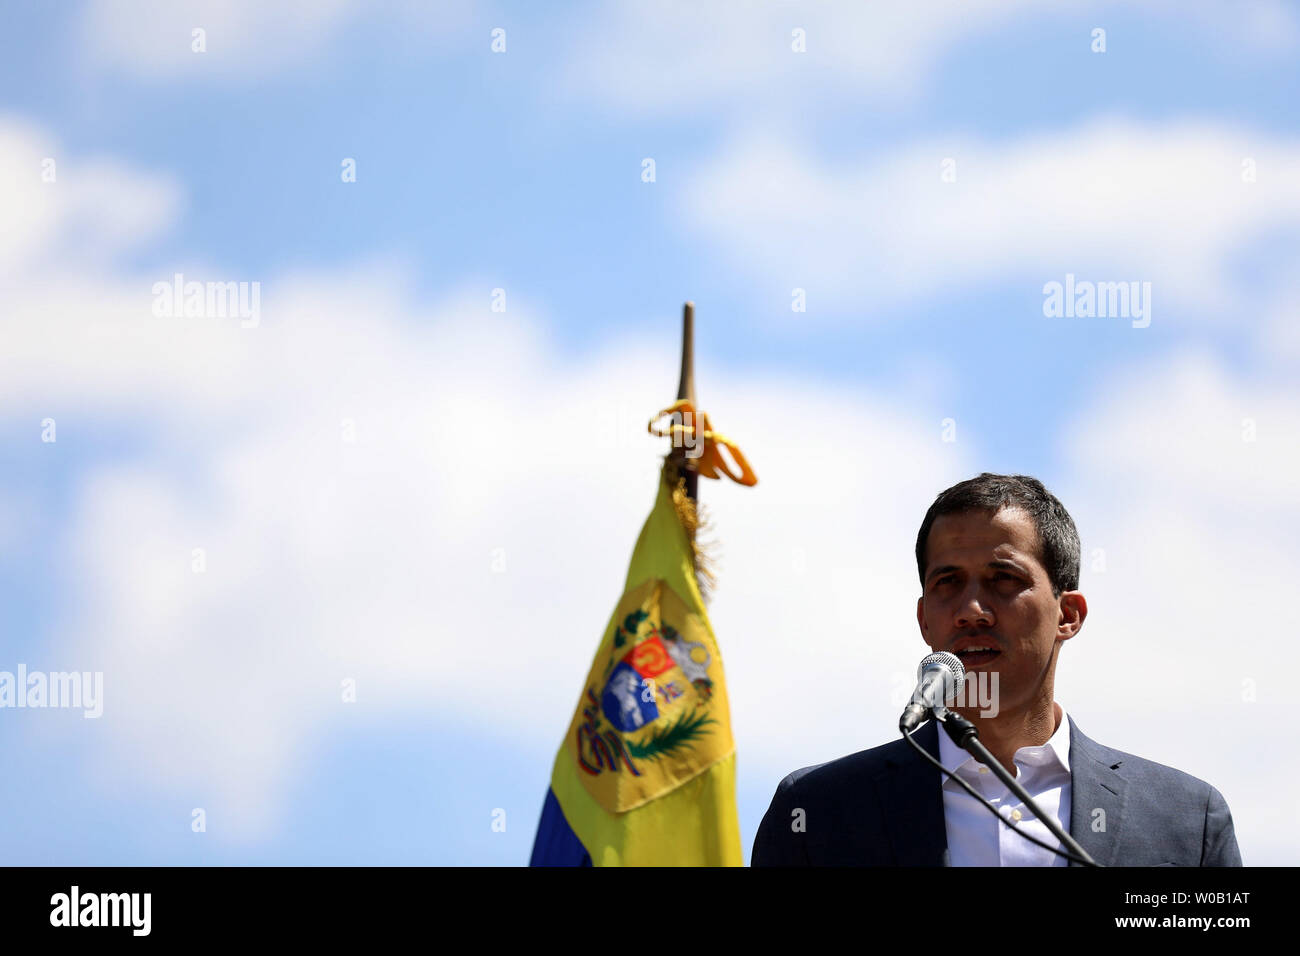 Opposition leader Juan Guaido speaks before thousands of supporters, in Caracas on February 2, 2019. Venezuelan protesters flowed into the streets of Caracas Saturday, with flags and placards, many to support opposition leader Juan Guaido's calls for democratic elections and others to back embattled President Nicolas Maduro.     Photo by Cristian Hernandez/UPI Stock Photo